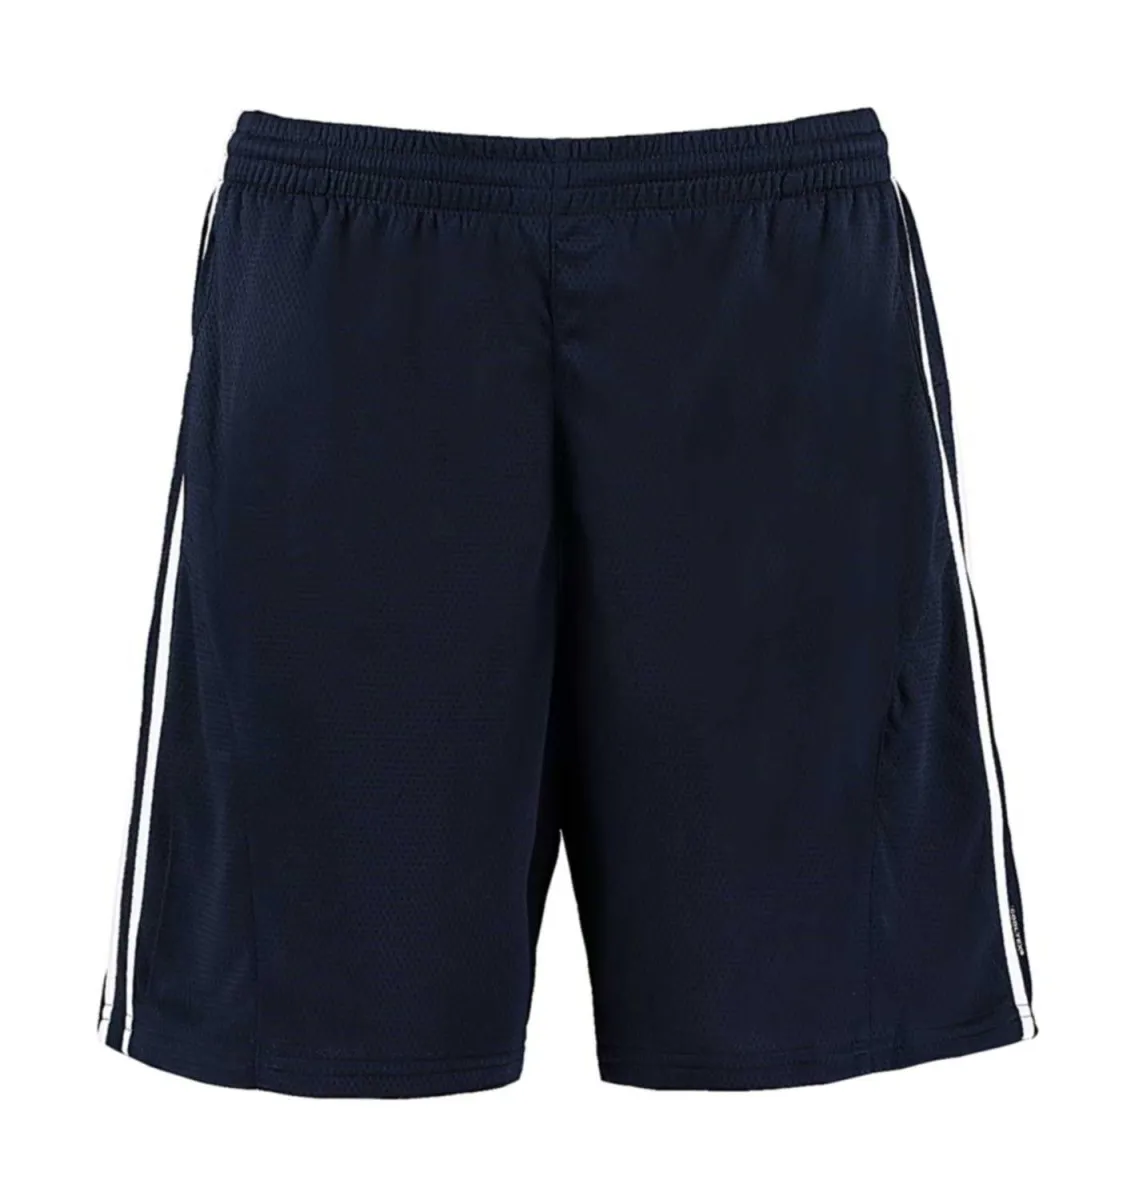 Cooltex sports shorts dark blue with white stripes from the front